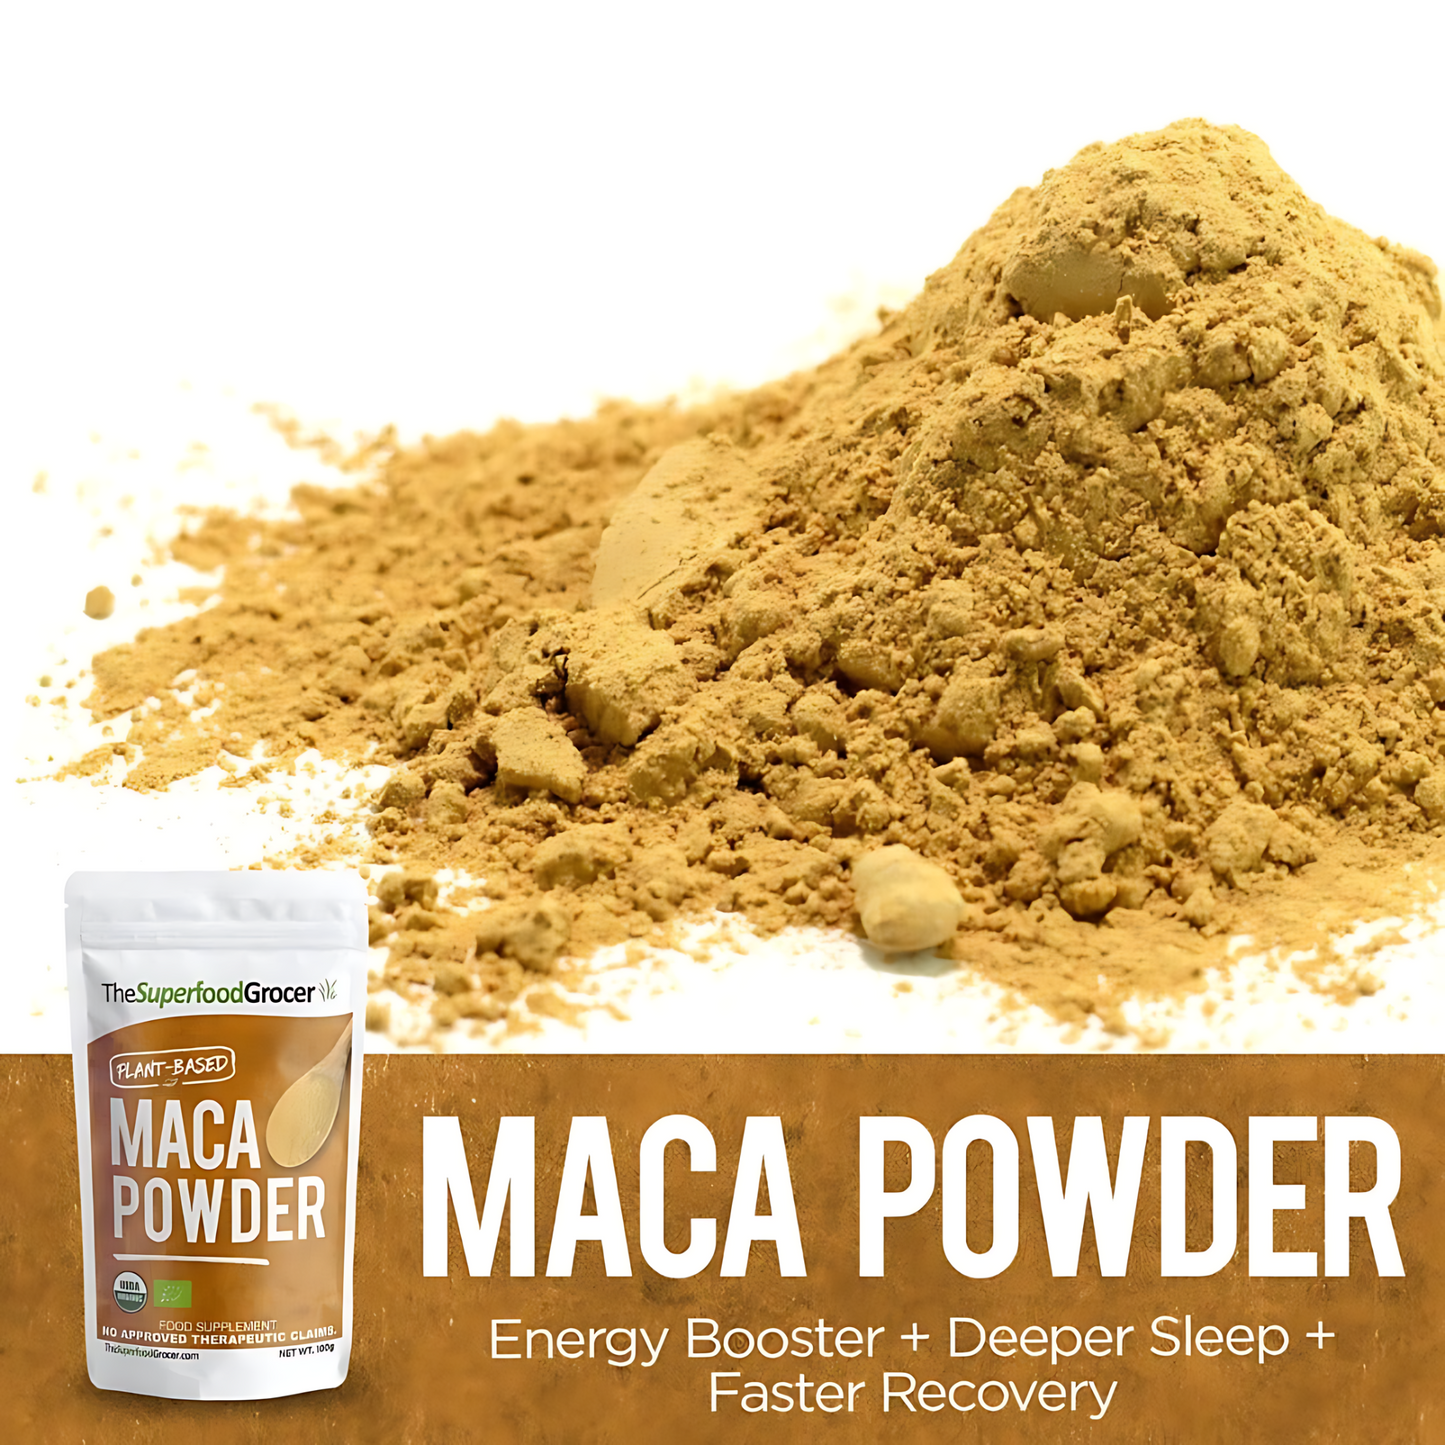 The Superfood Grocer Organic Maca Root Powder 100g